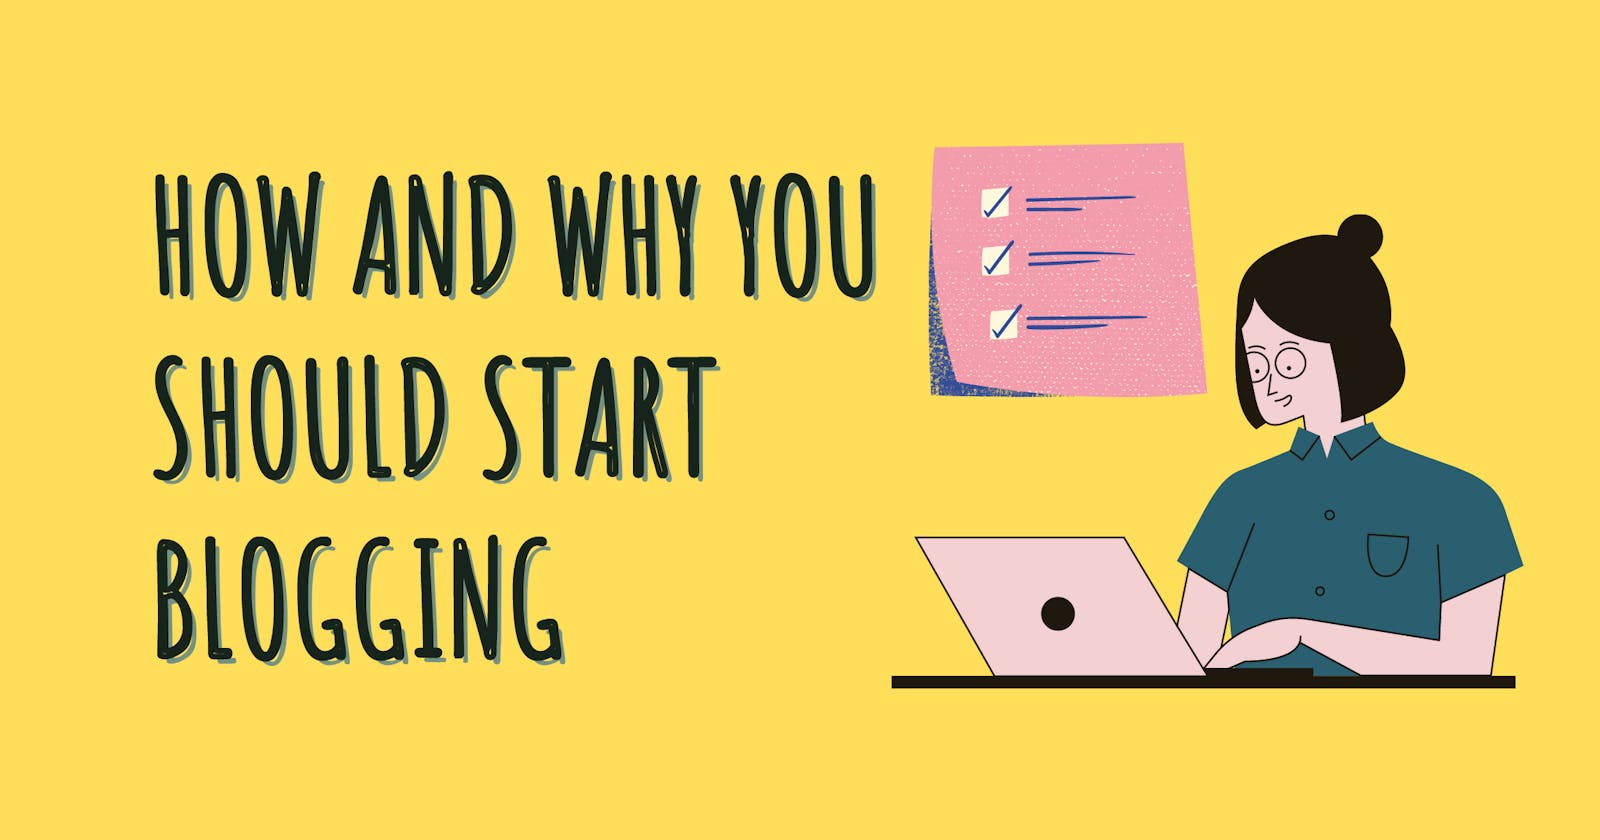 Blogging: How and Why You Should Do It